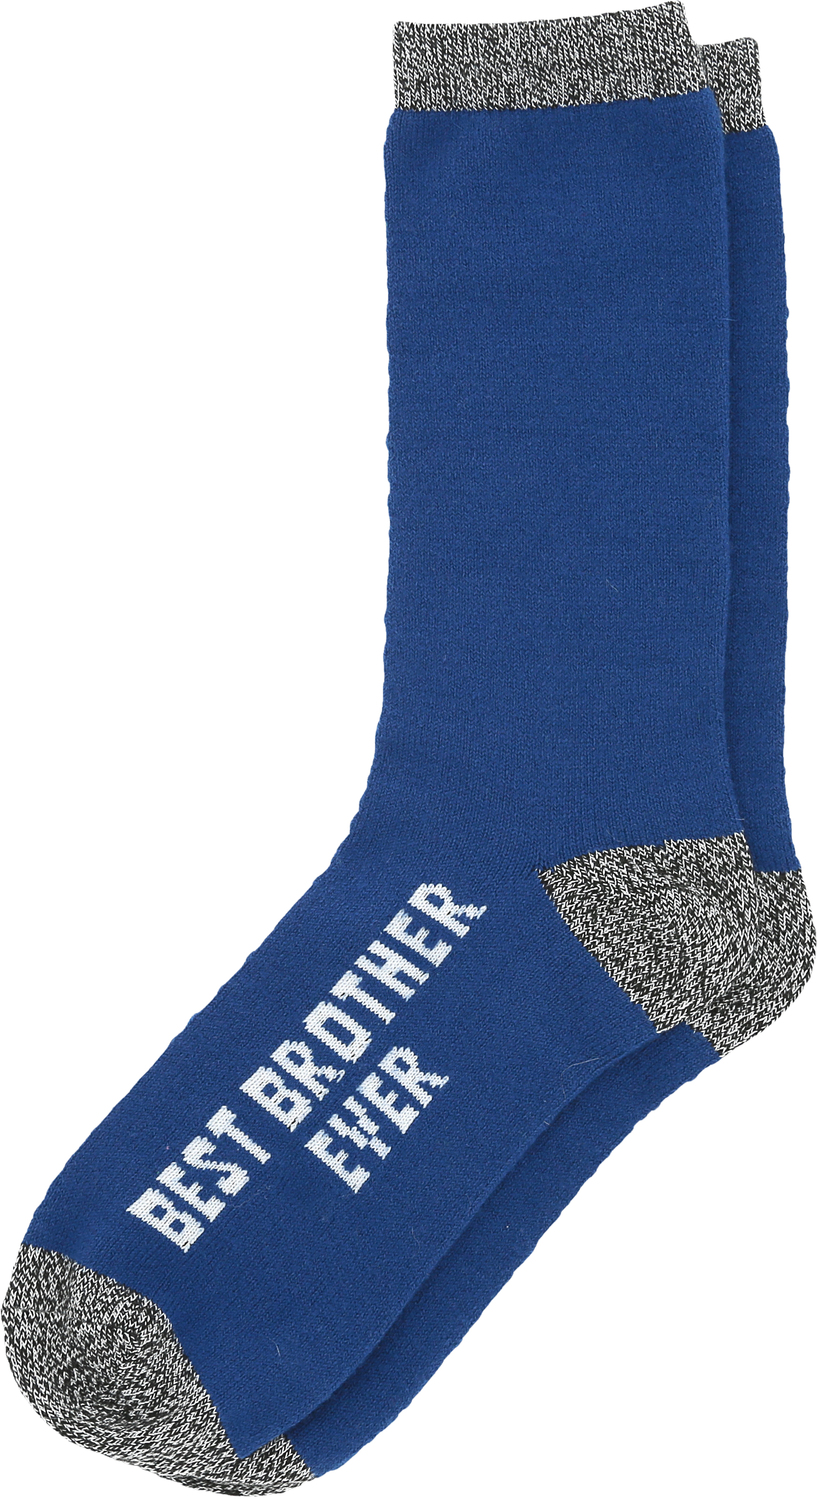 Brother by Man Made - Brother - Men's Socks